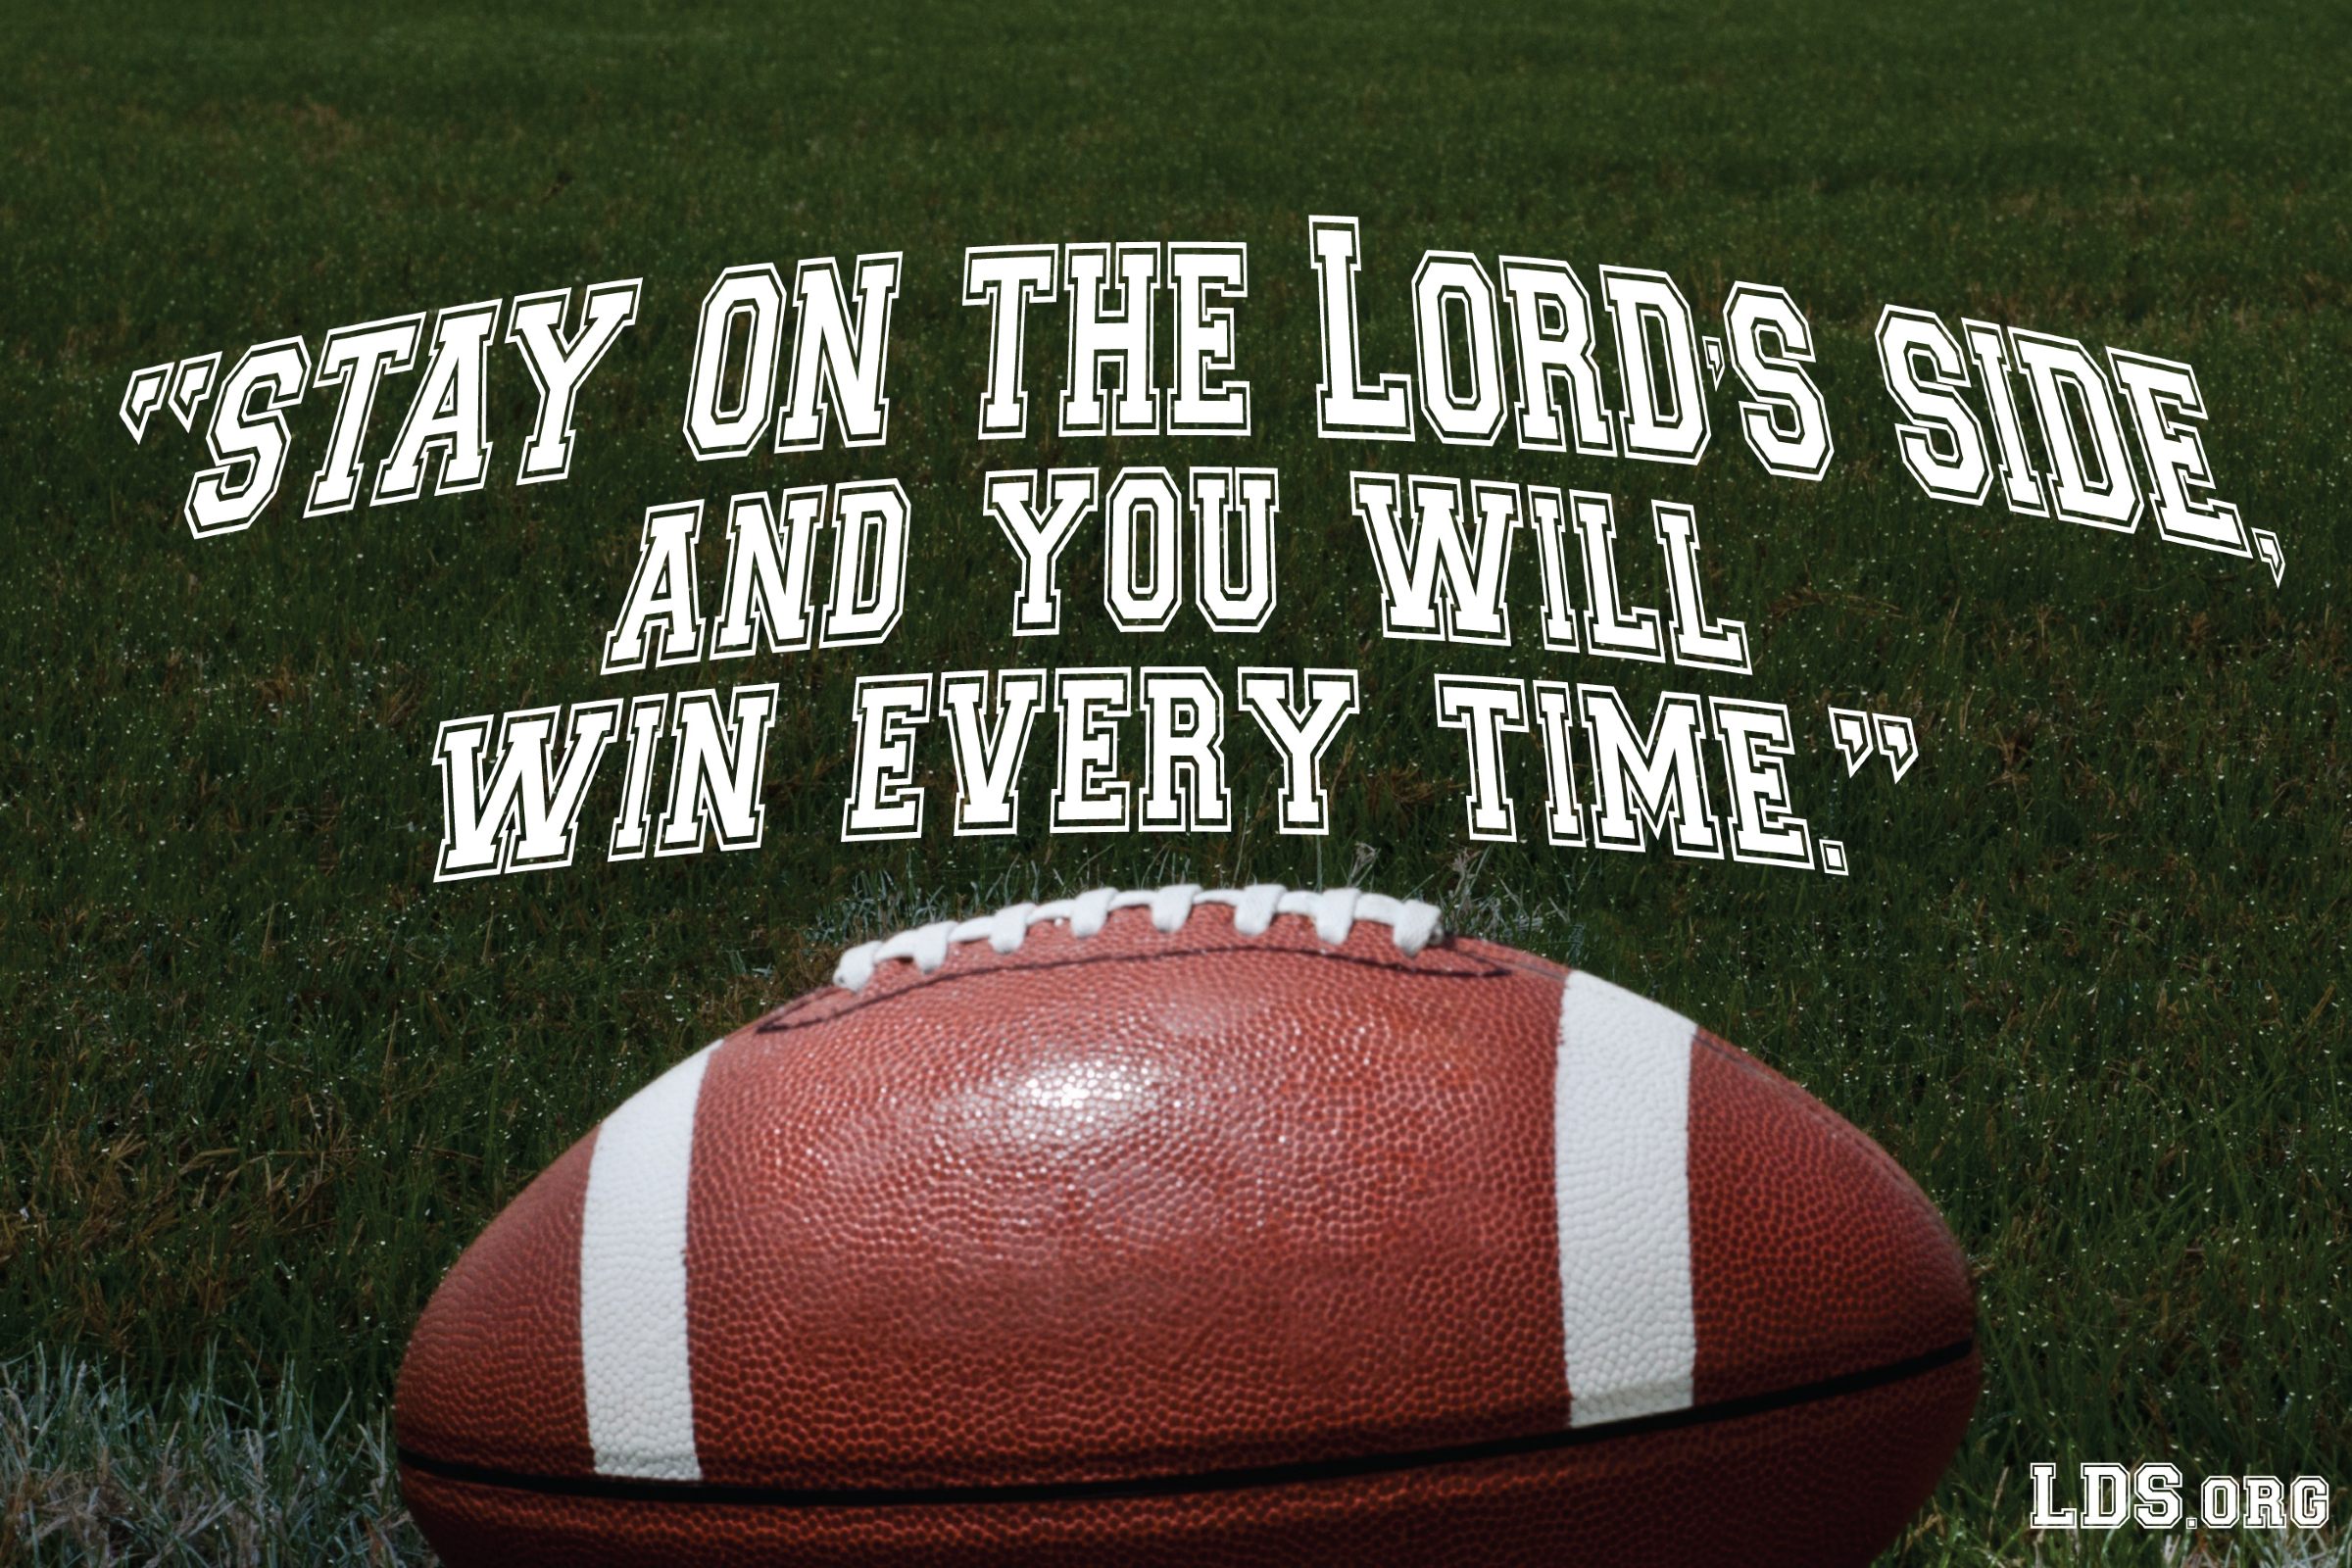 football quotes wallpaper,rugby ball,american football,super bowl,gridiron football,football